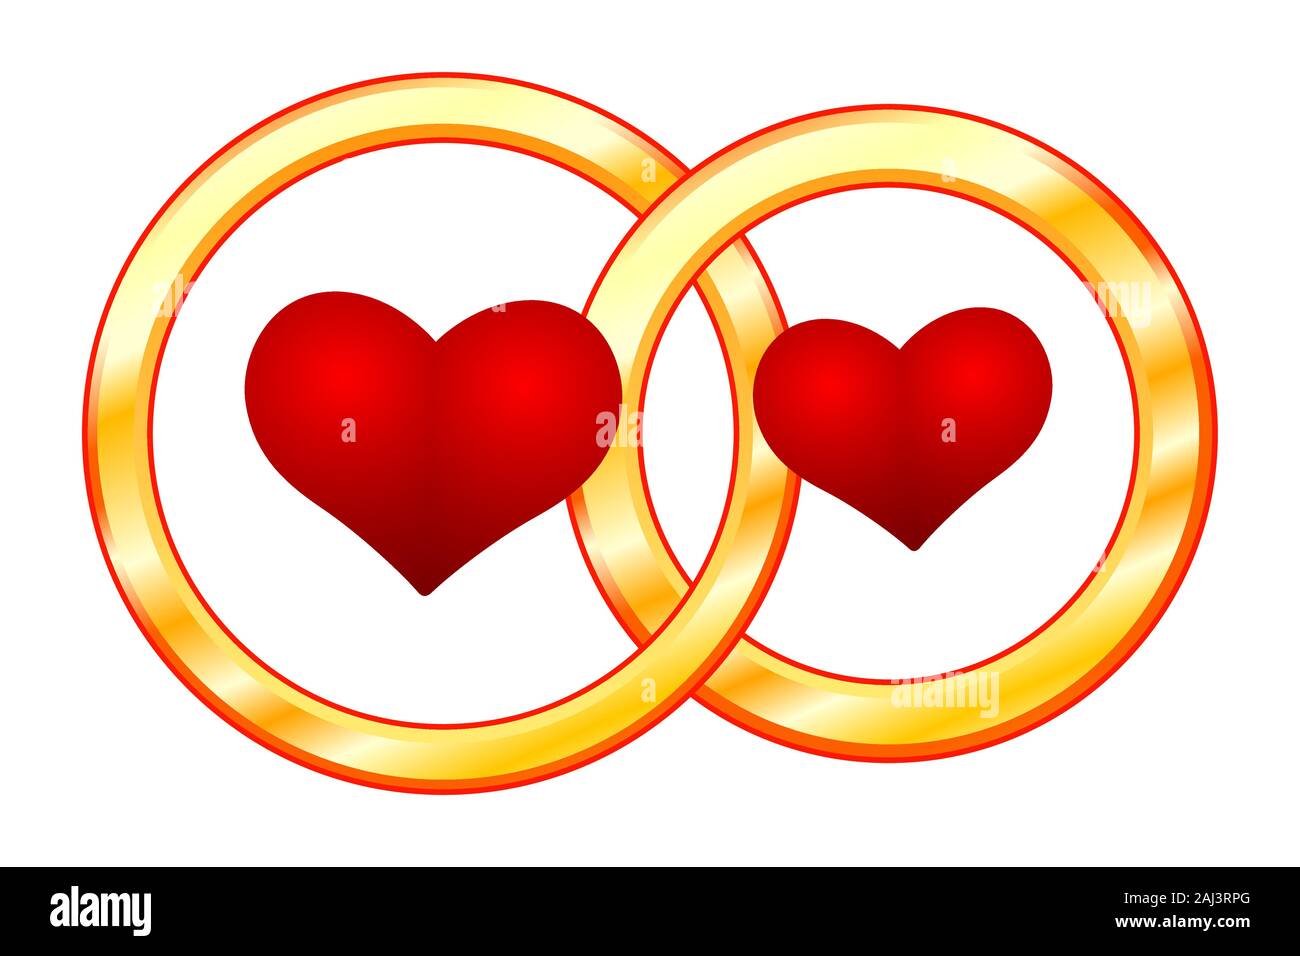 Illustration of the valentine's day abstract hearts and wedding rings Stock Vector